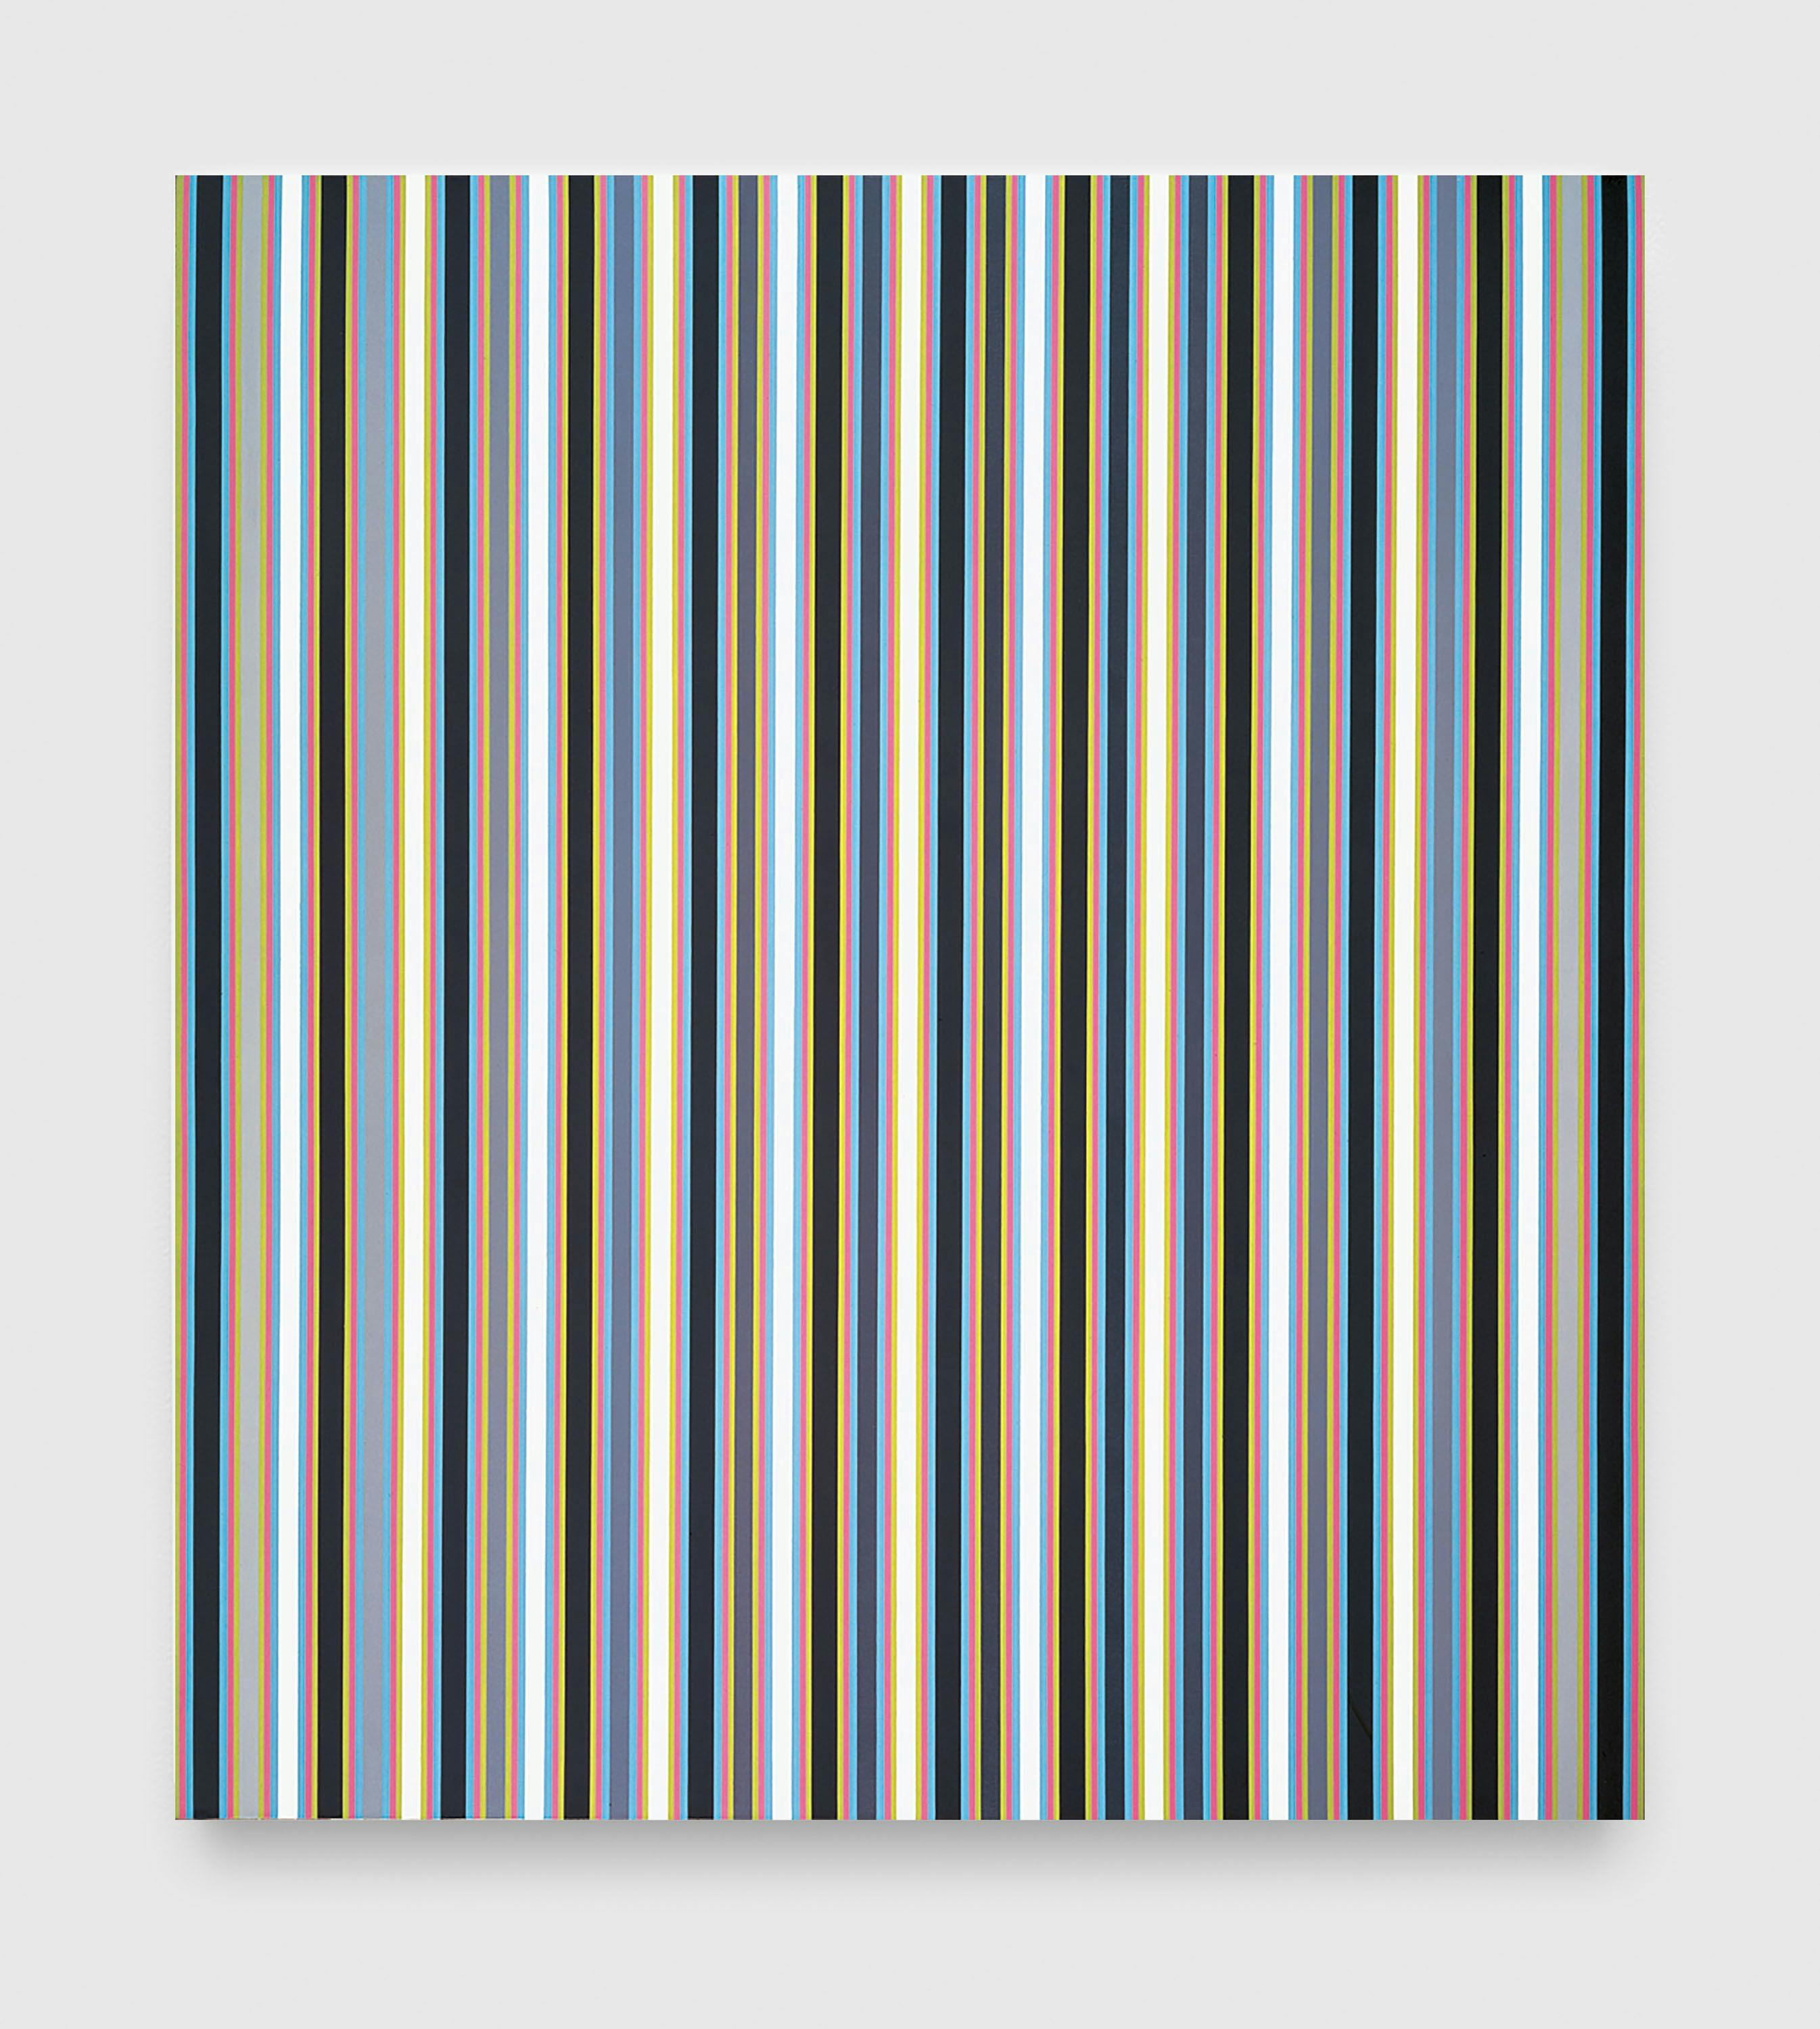 A painting by Bridget Riley, titled Cantus Firmus, 1972 to 1973.